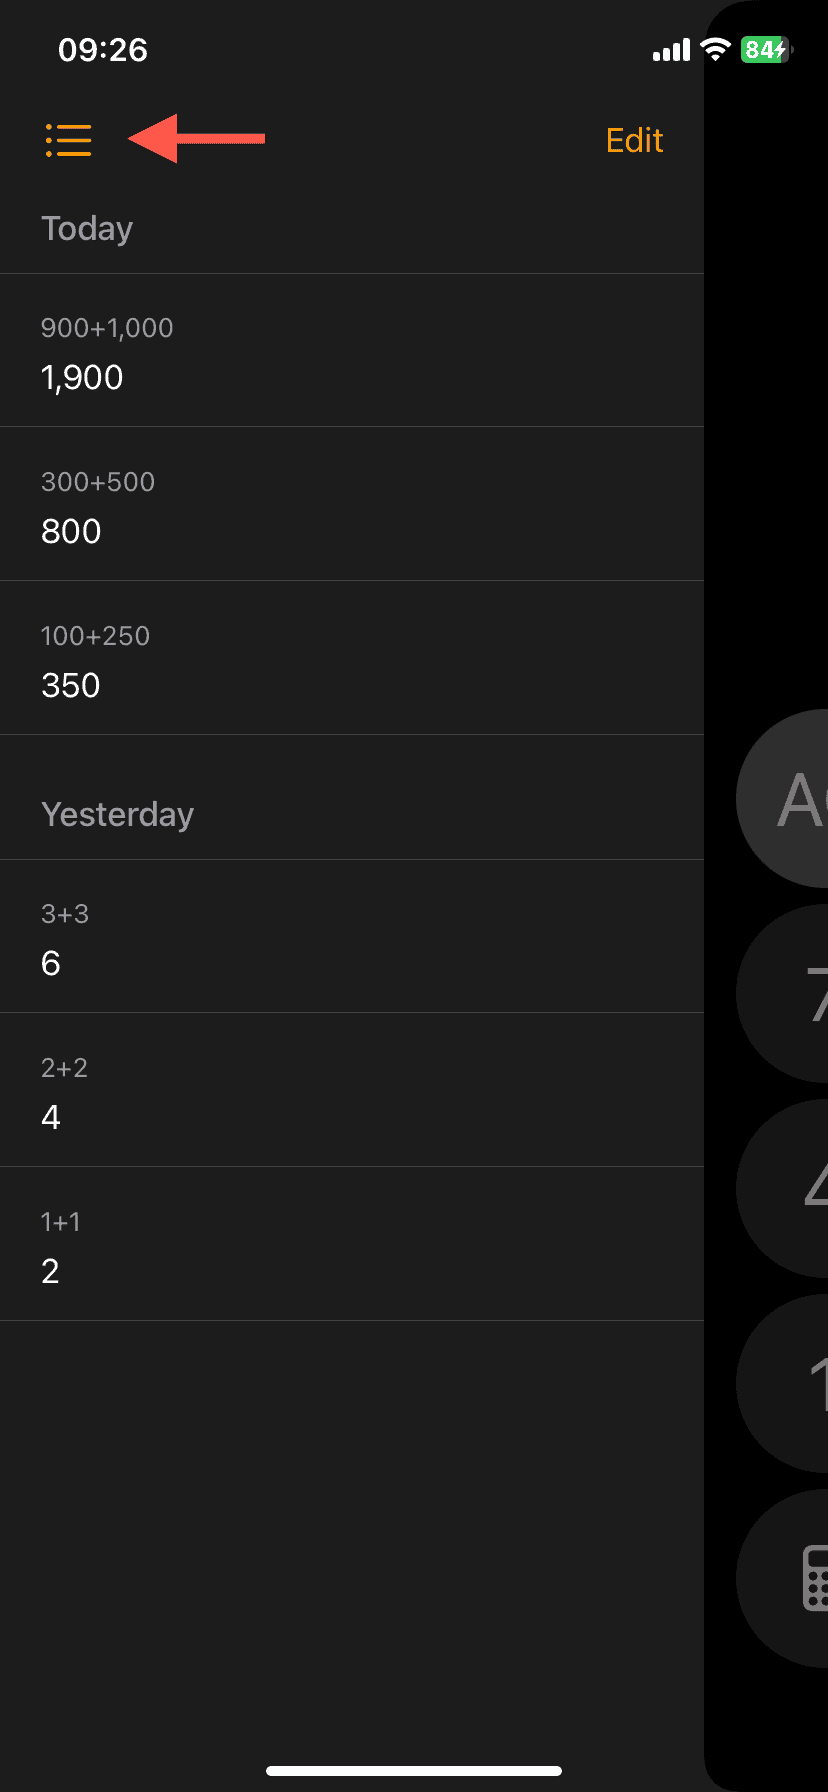 The History tab in Calculator for iOS 18.